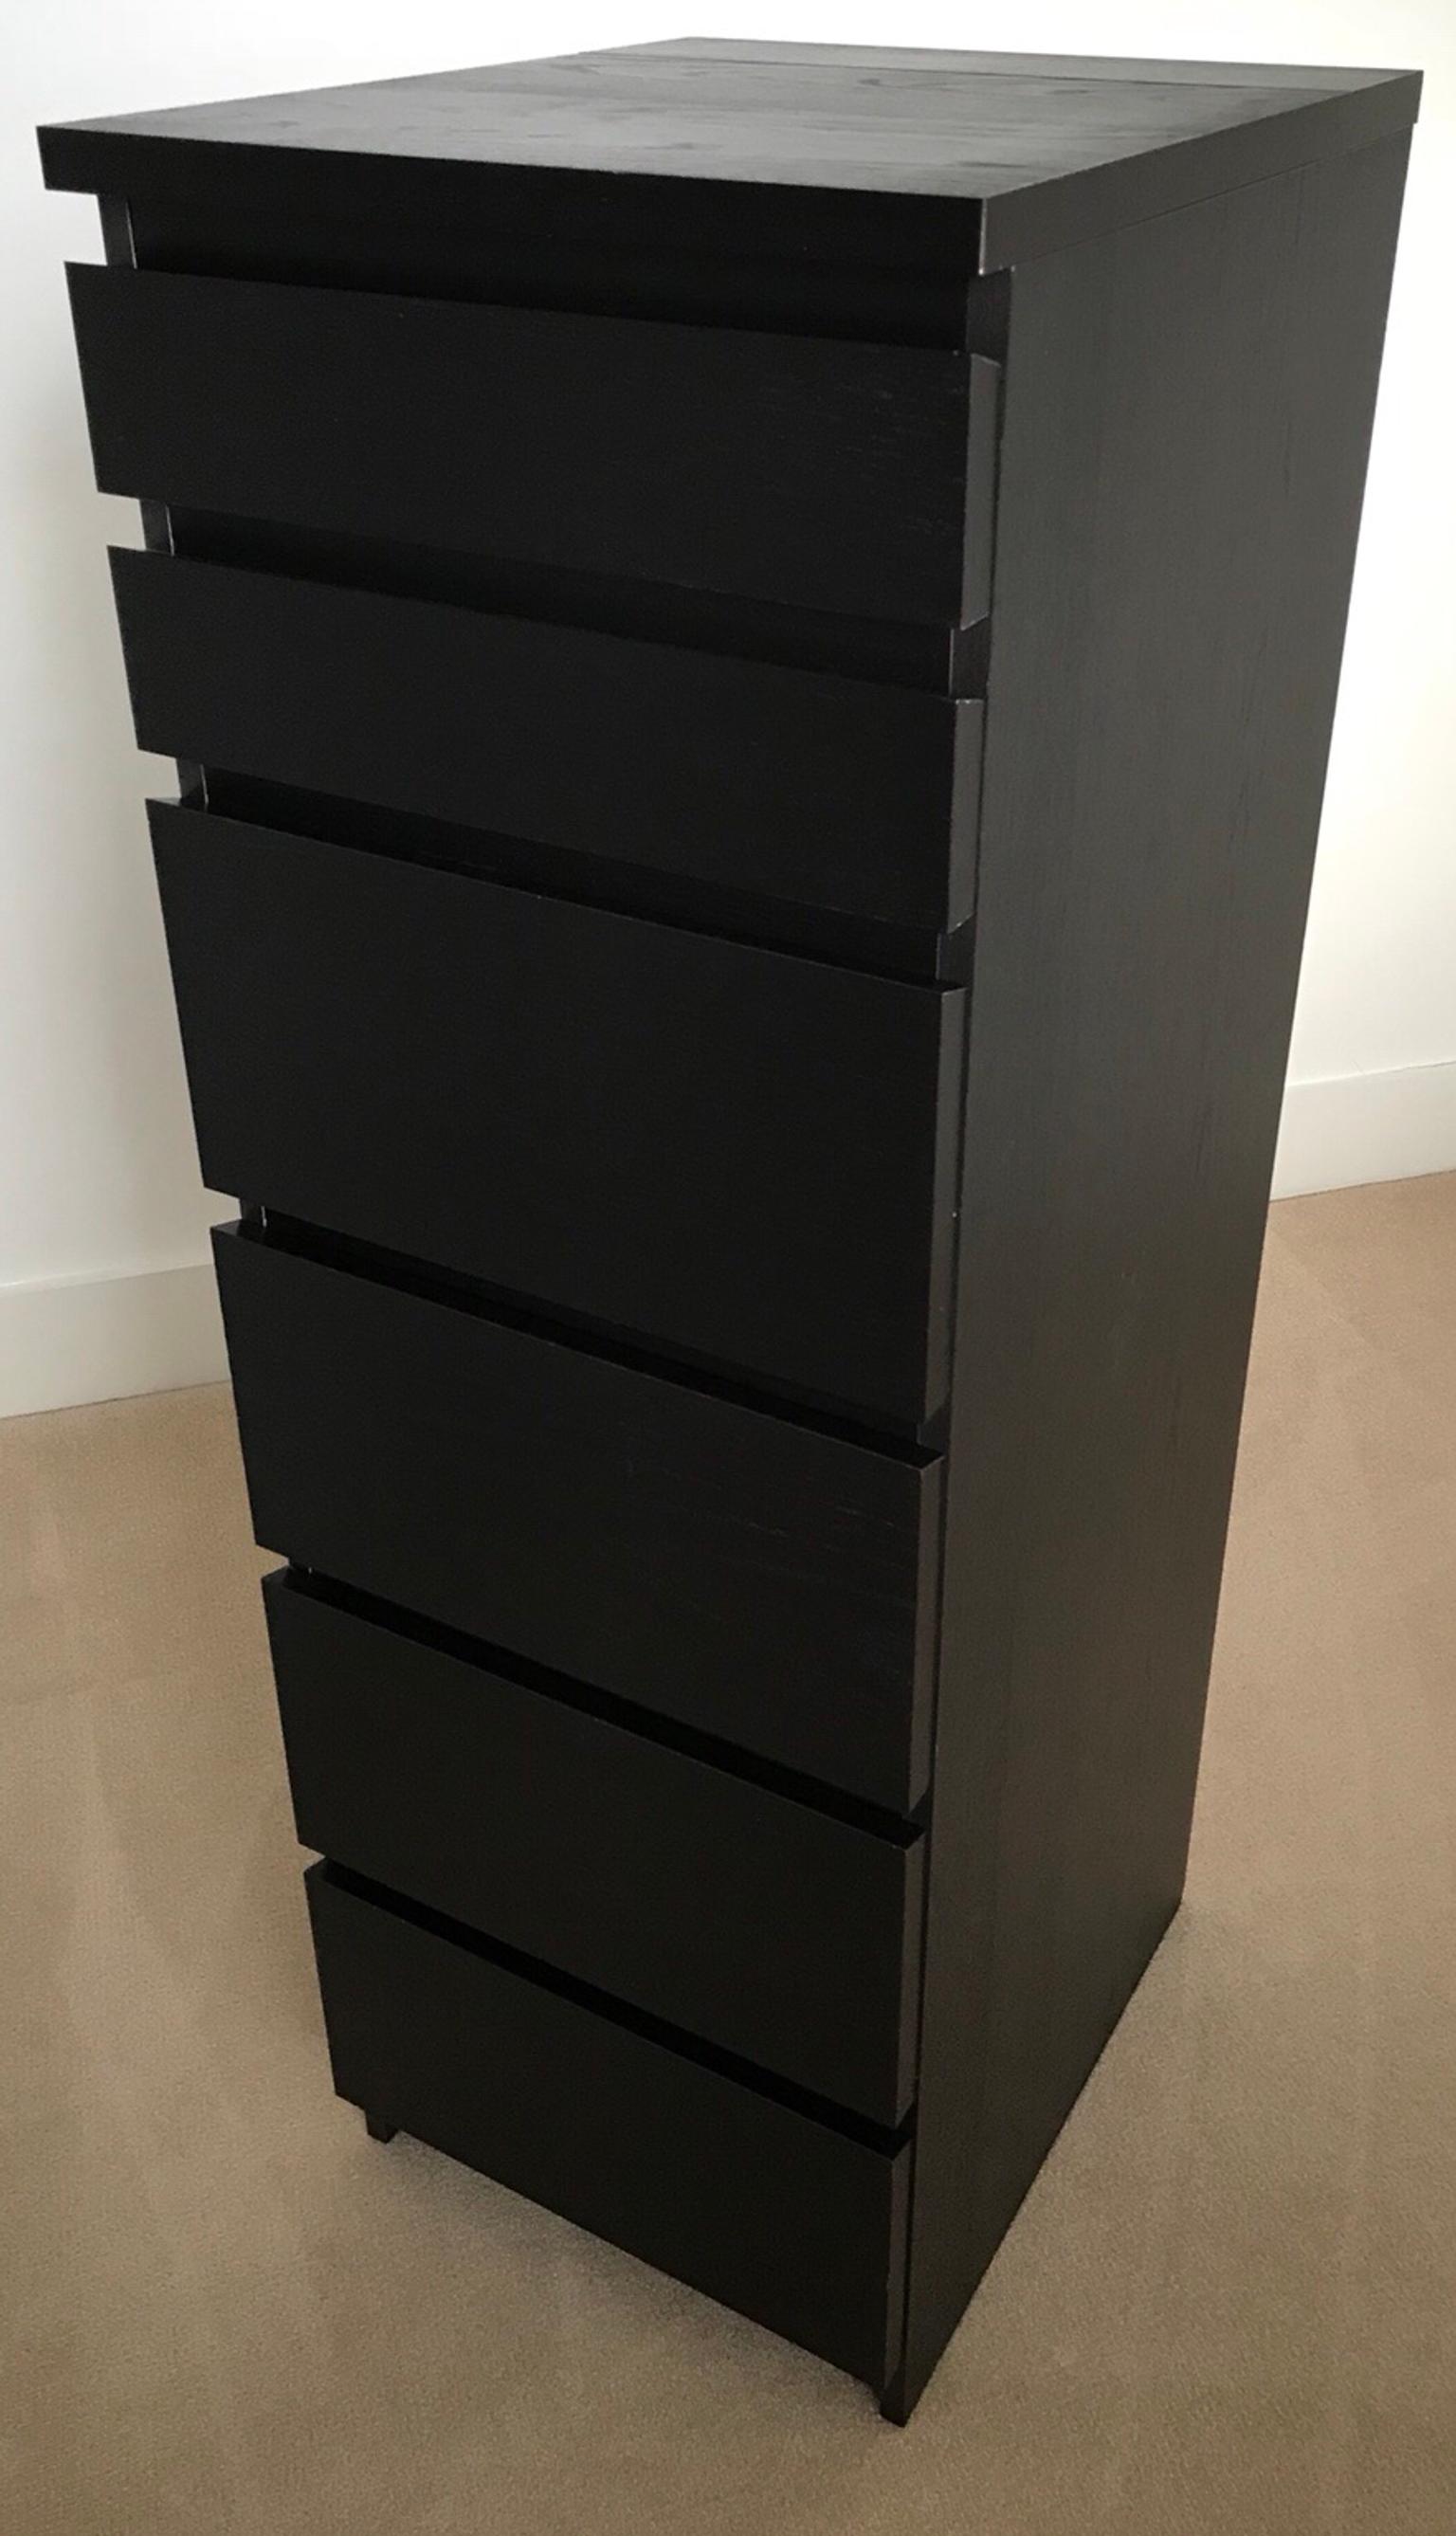 Ikea Tall Black Narrow Malm 6 Drawer Set In Beeston For 50 00 For